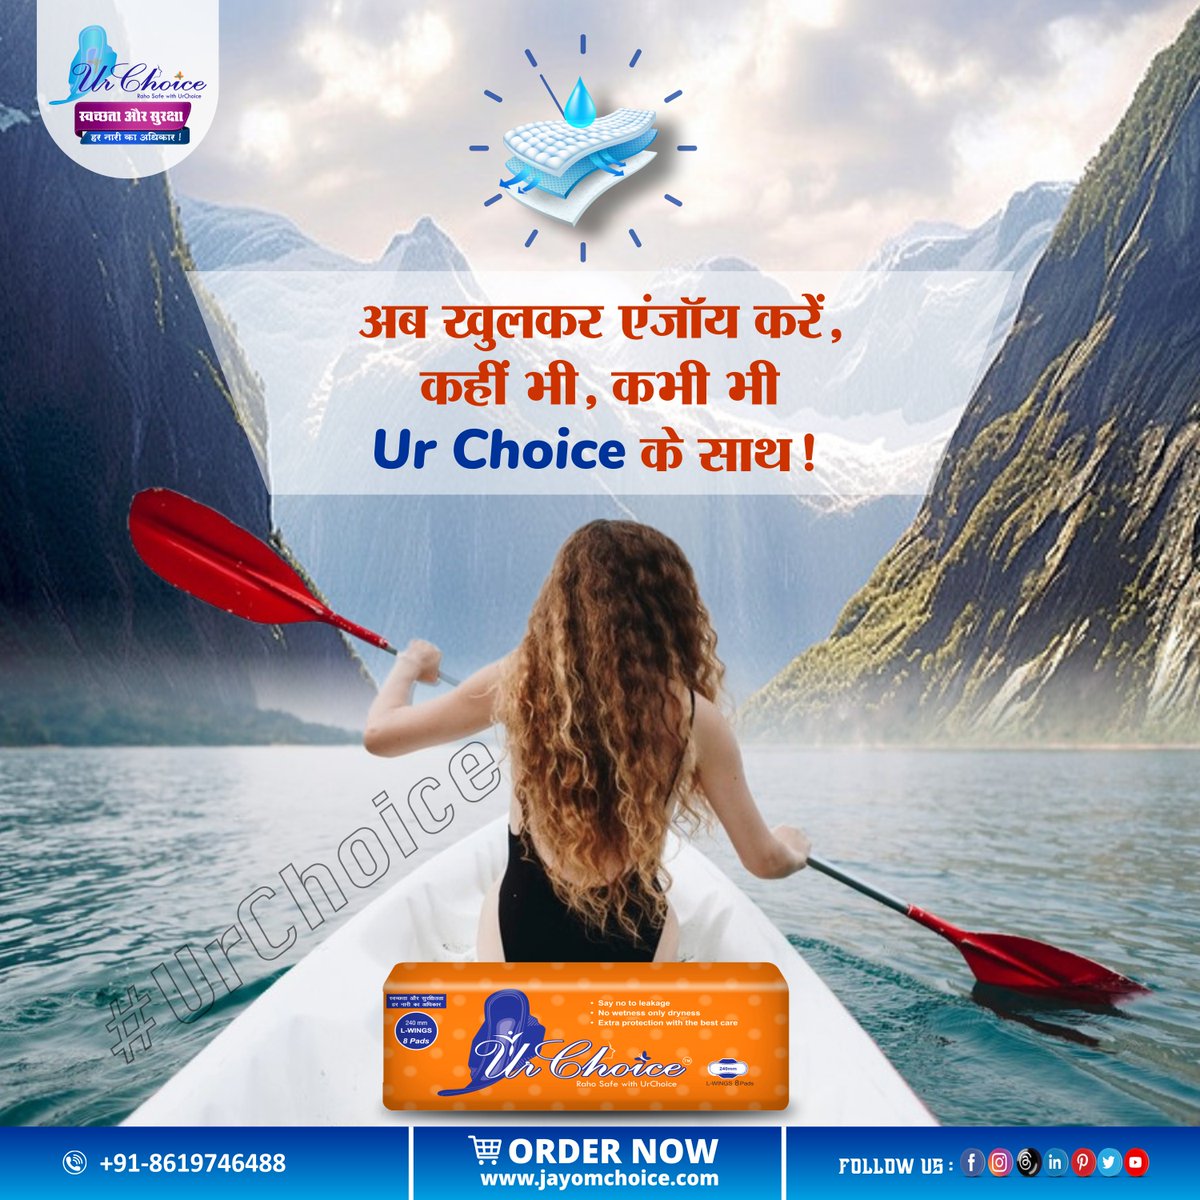 Protection, Anytime, Anywhere : Ur Choice Sanitary Pads Keep You Comfortable and Confident On-the-Go, All Day, Every Day!
Order Now : jayomchoice.com
#StayPrepared #urchoice #PeriodProtection #leakagefree #comfort #Absorption #Period #SanitaryPads #COVID19 #AnushkaSharma